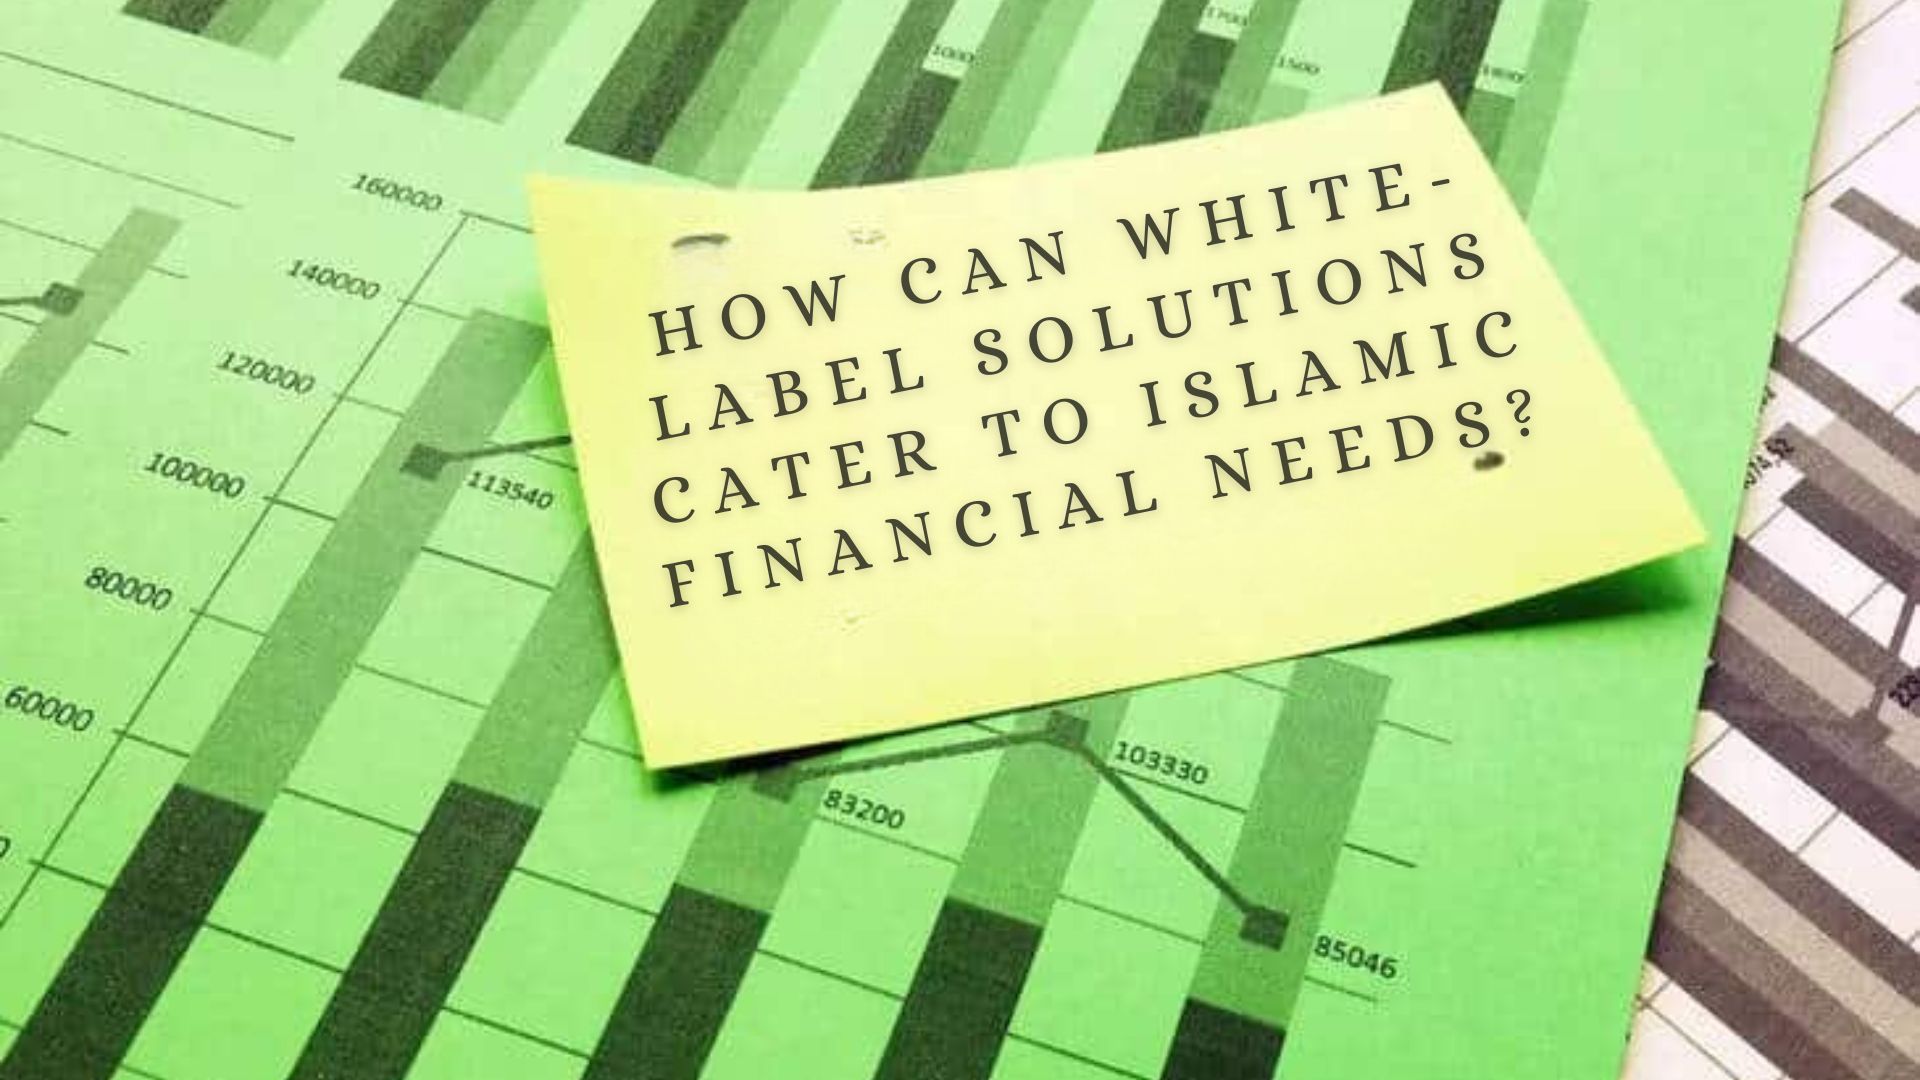 How Can White-Label Solutions Cater To Islamic Financial Needs?